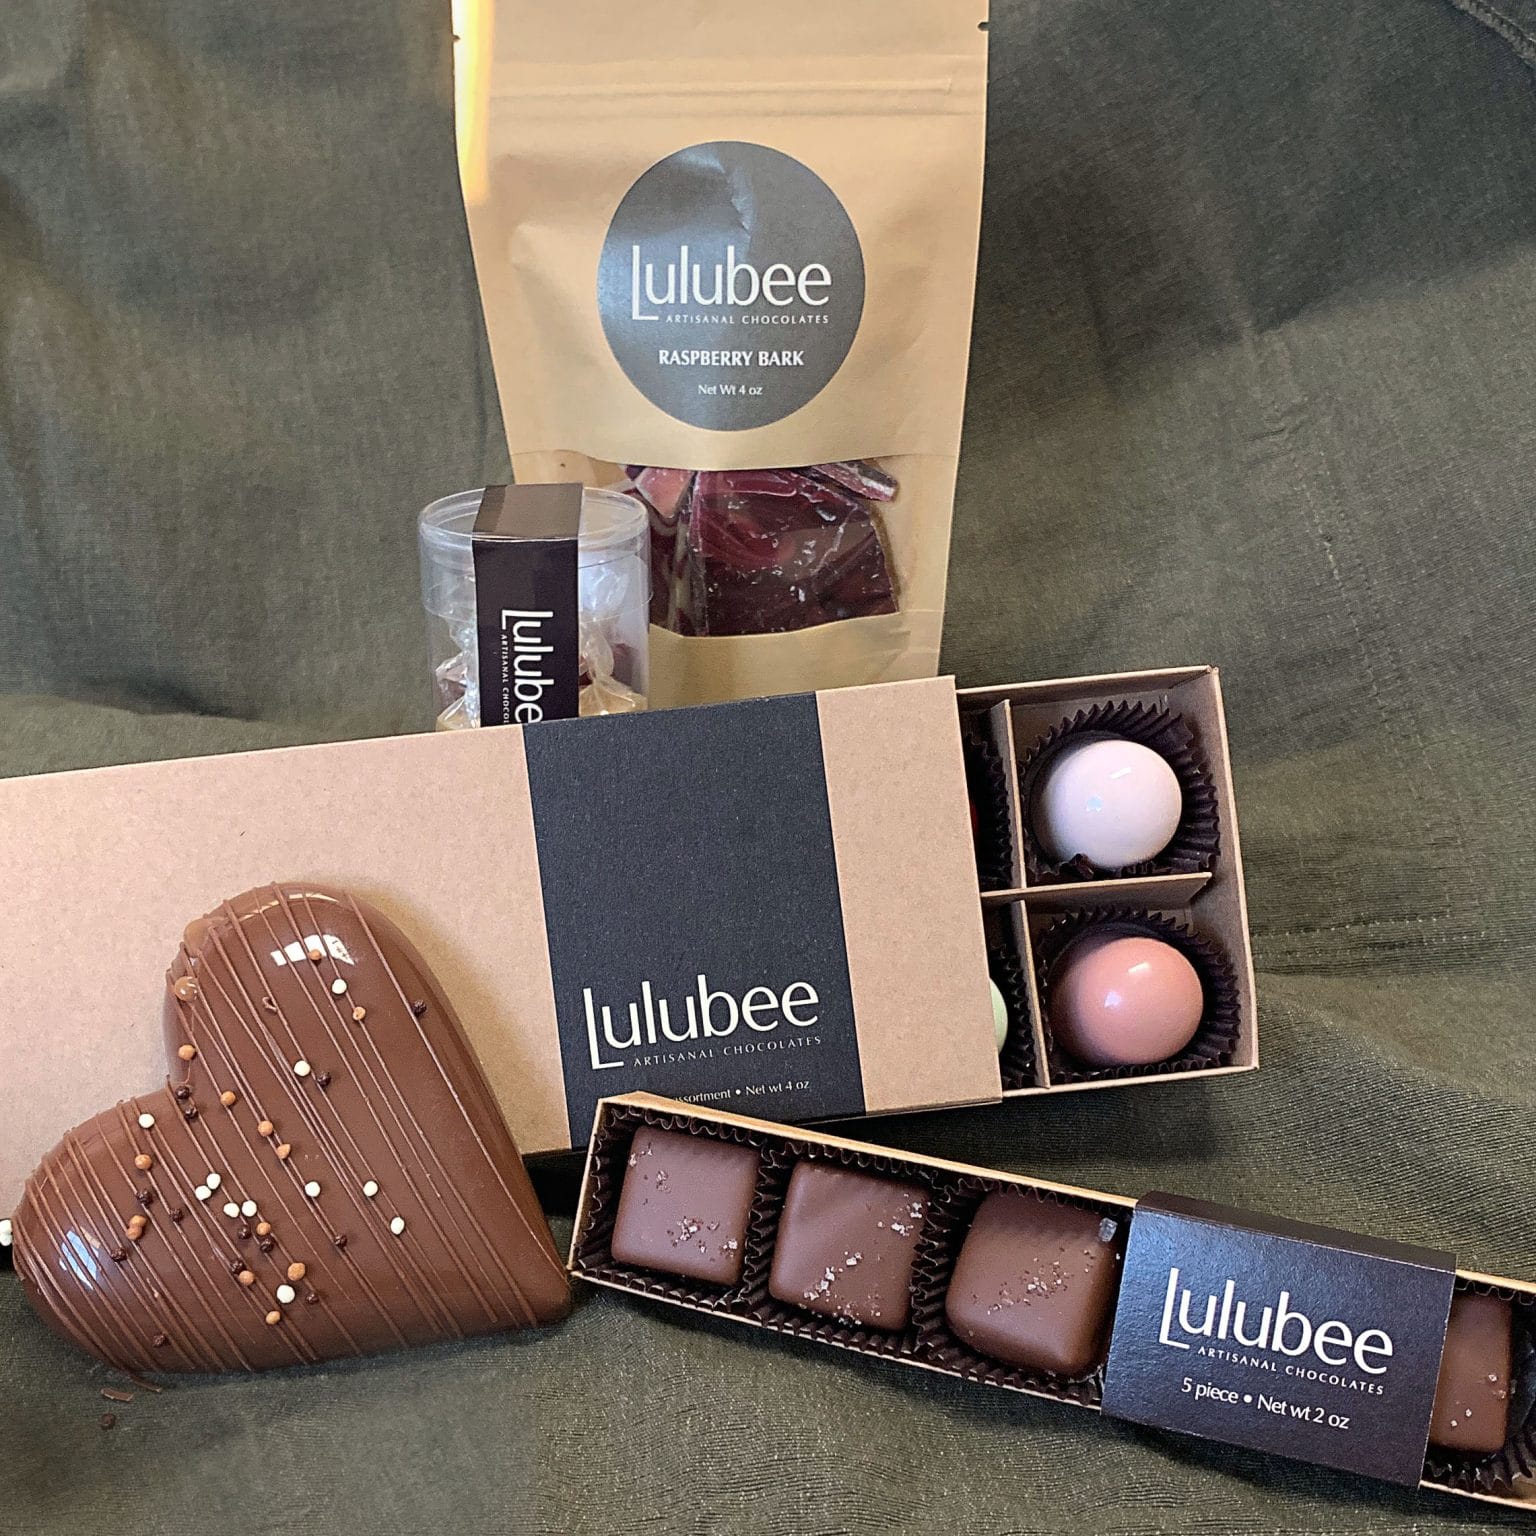 Collection of 5 different packages that contain 12 gourmet chocolate truffles, raspberry chocolate bark, confections, sea salt caramels, and a large gourmet milk chocolate heart